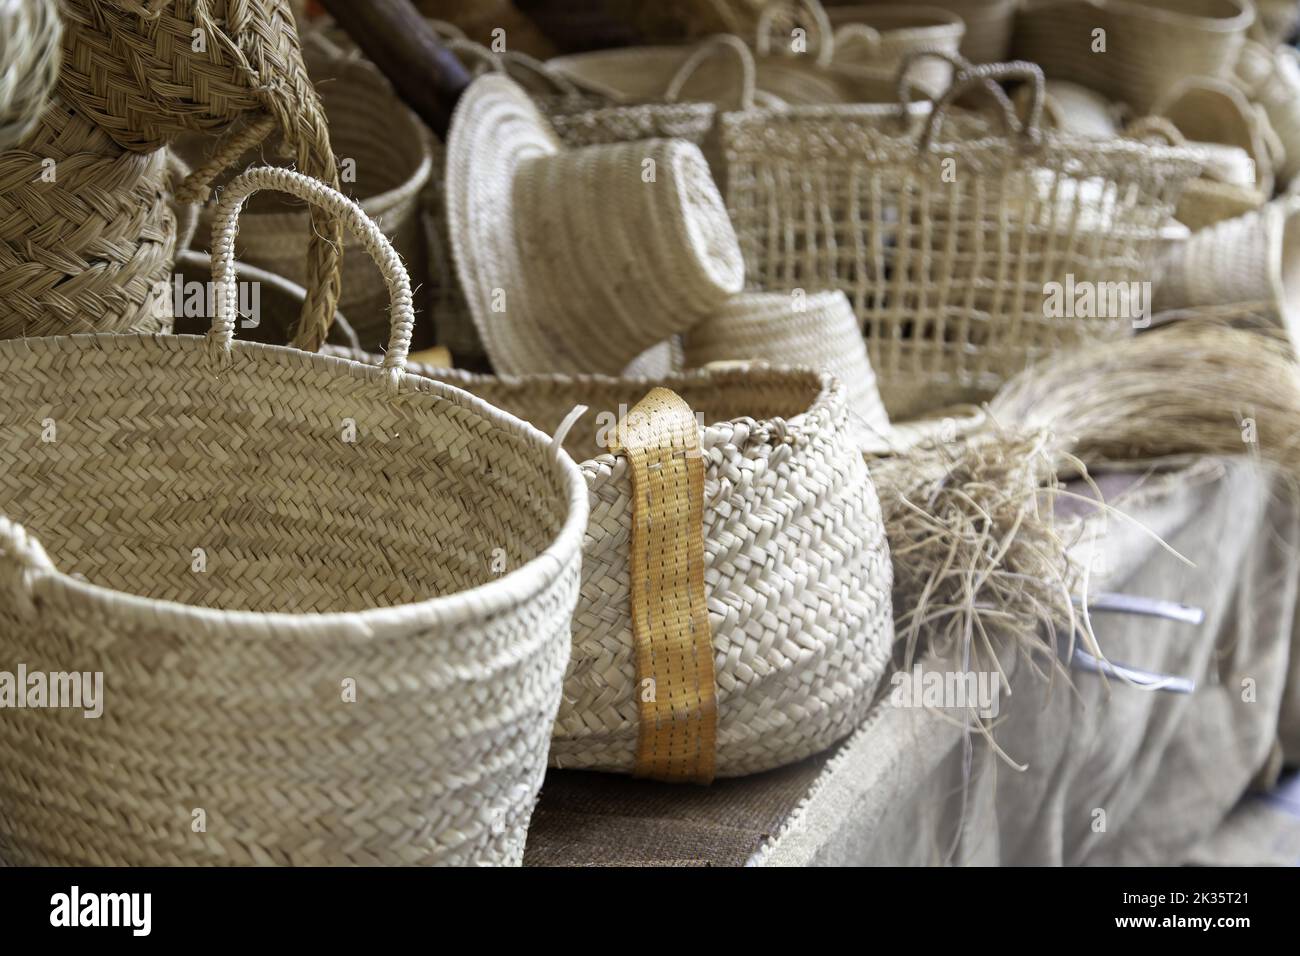 Detail of baskets and objects made with wicker, traditional market Stock Photo